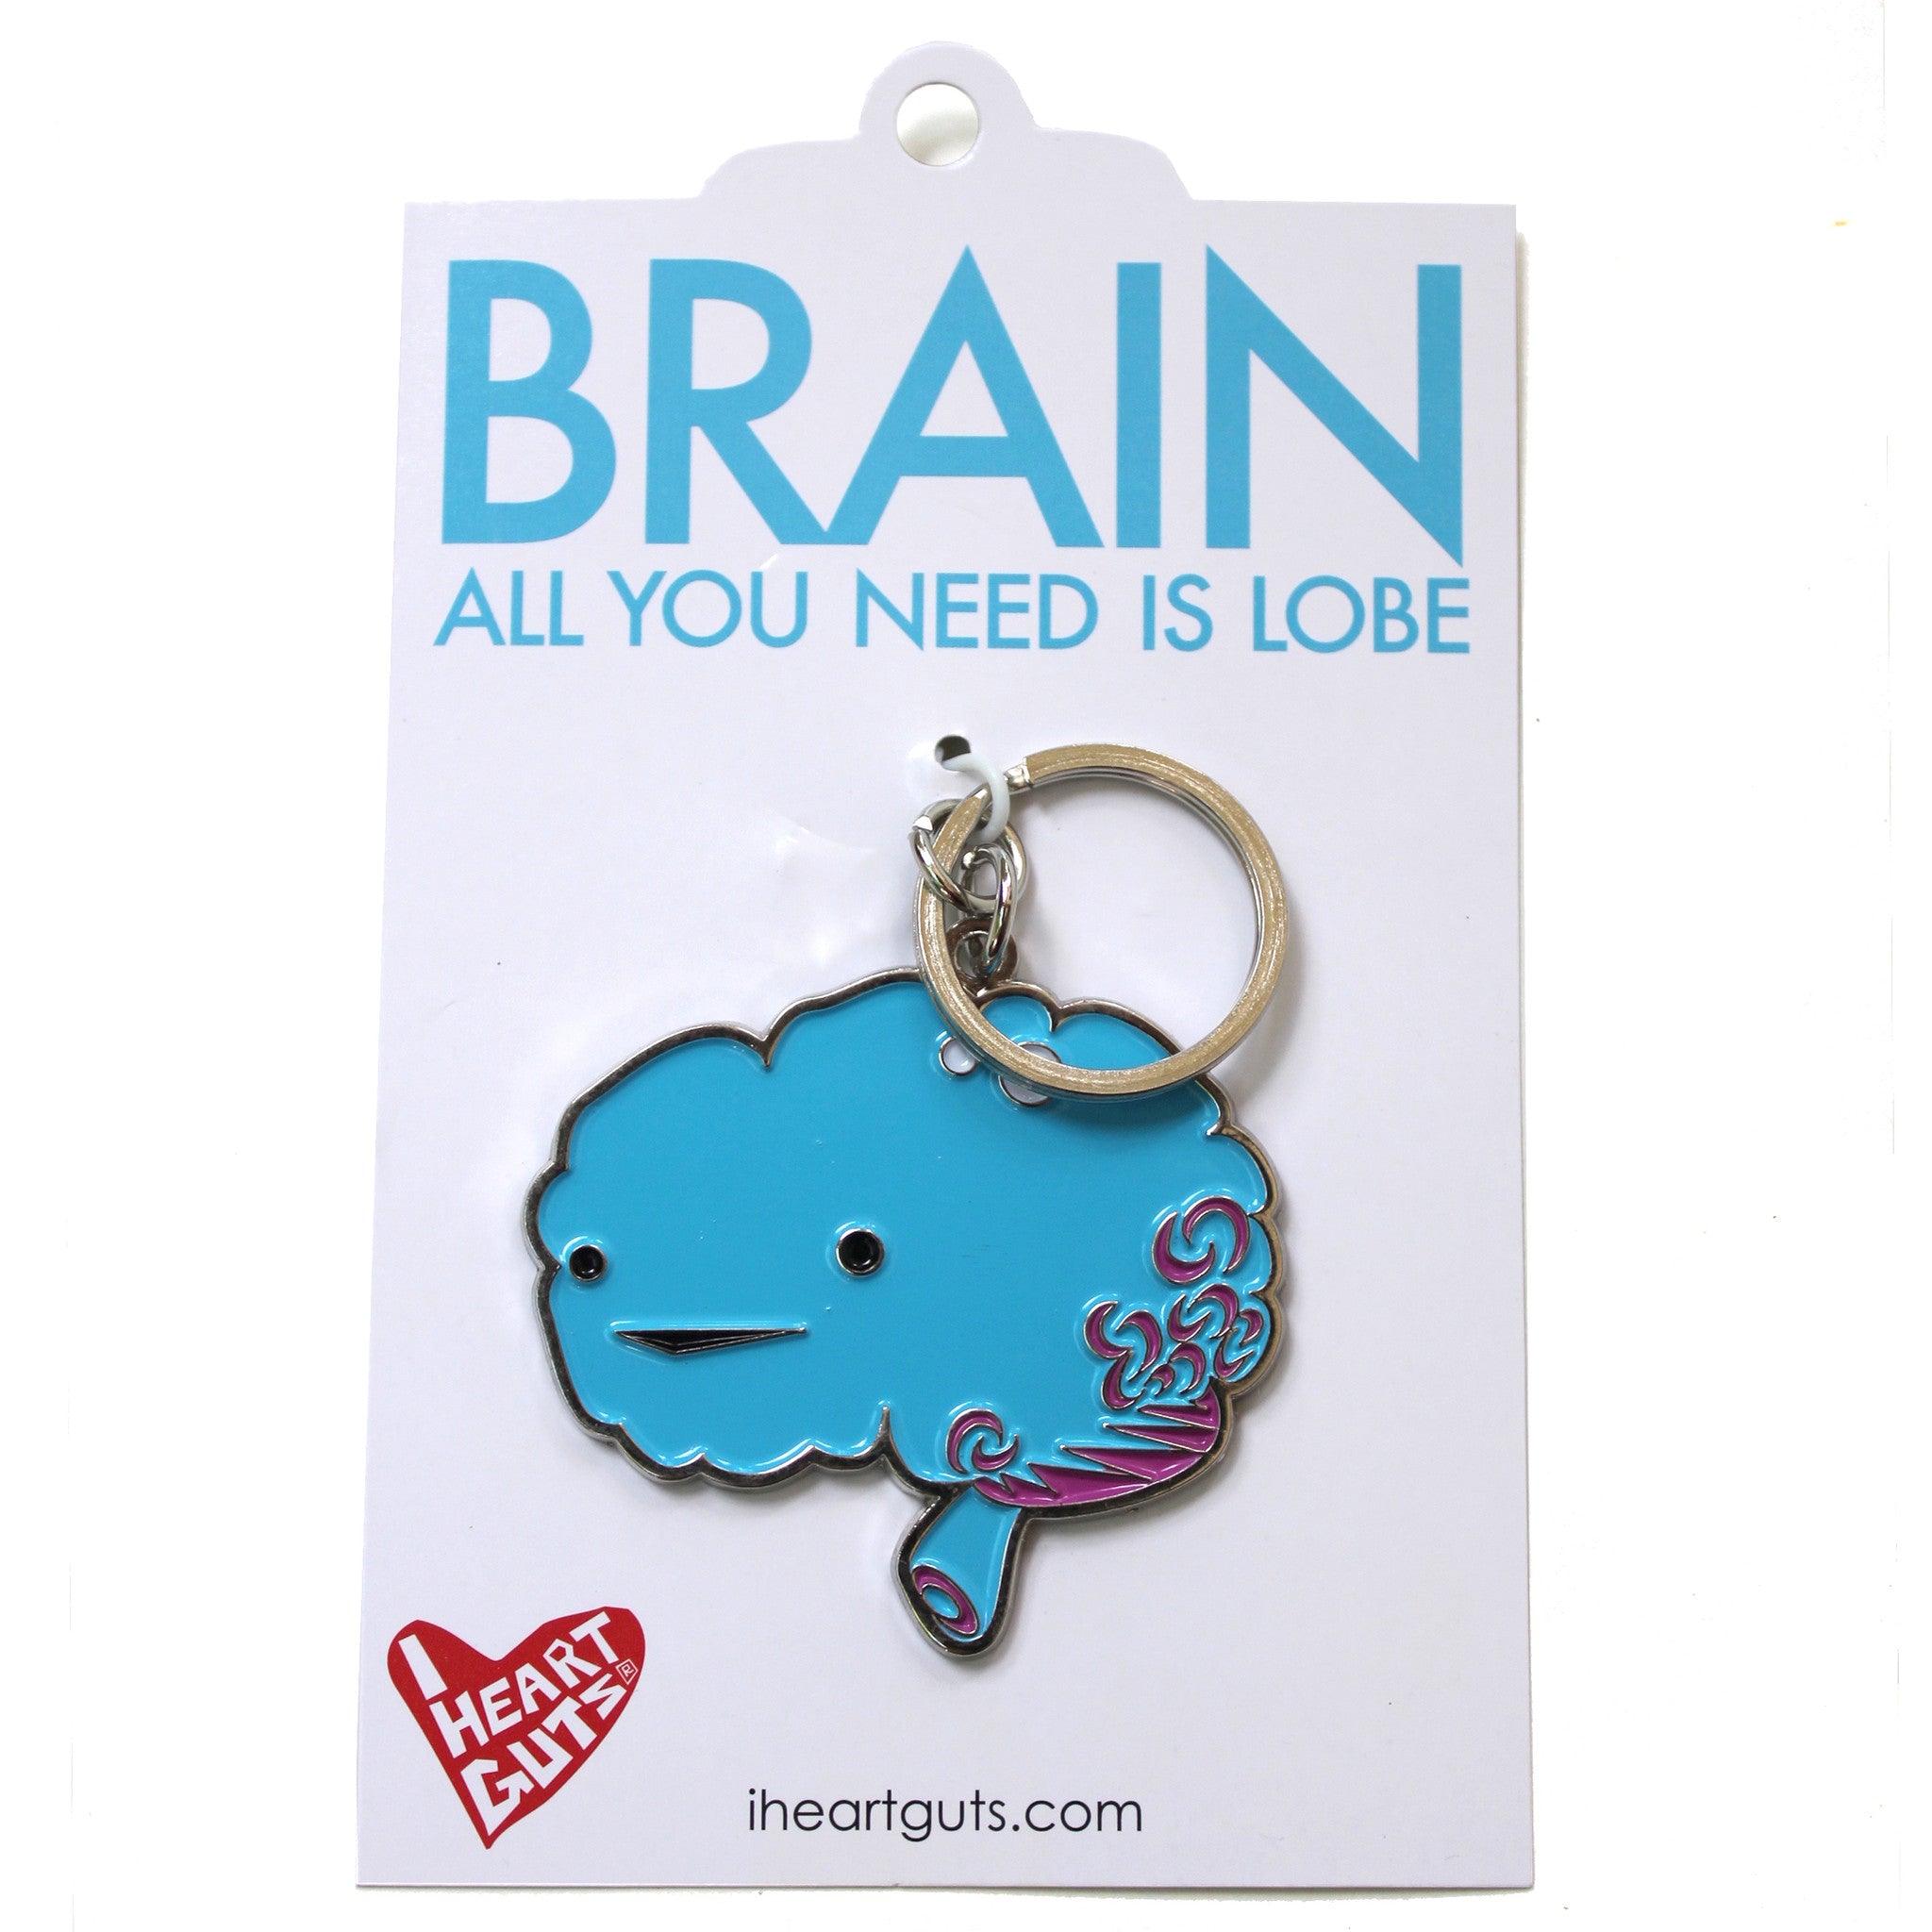 A blue enamel keychain of an illustrated brain with two eyes and a smile.